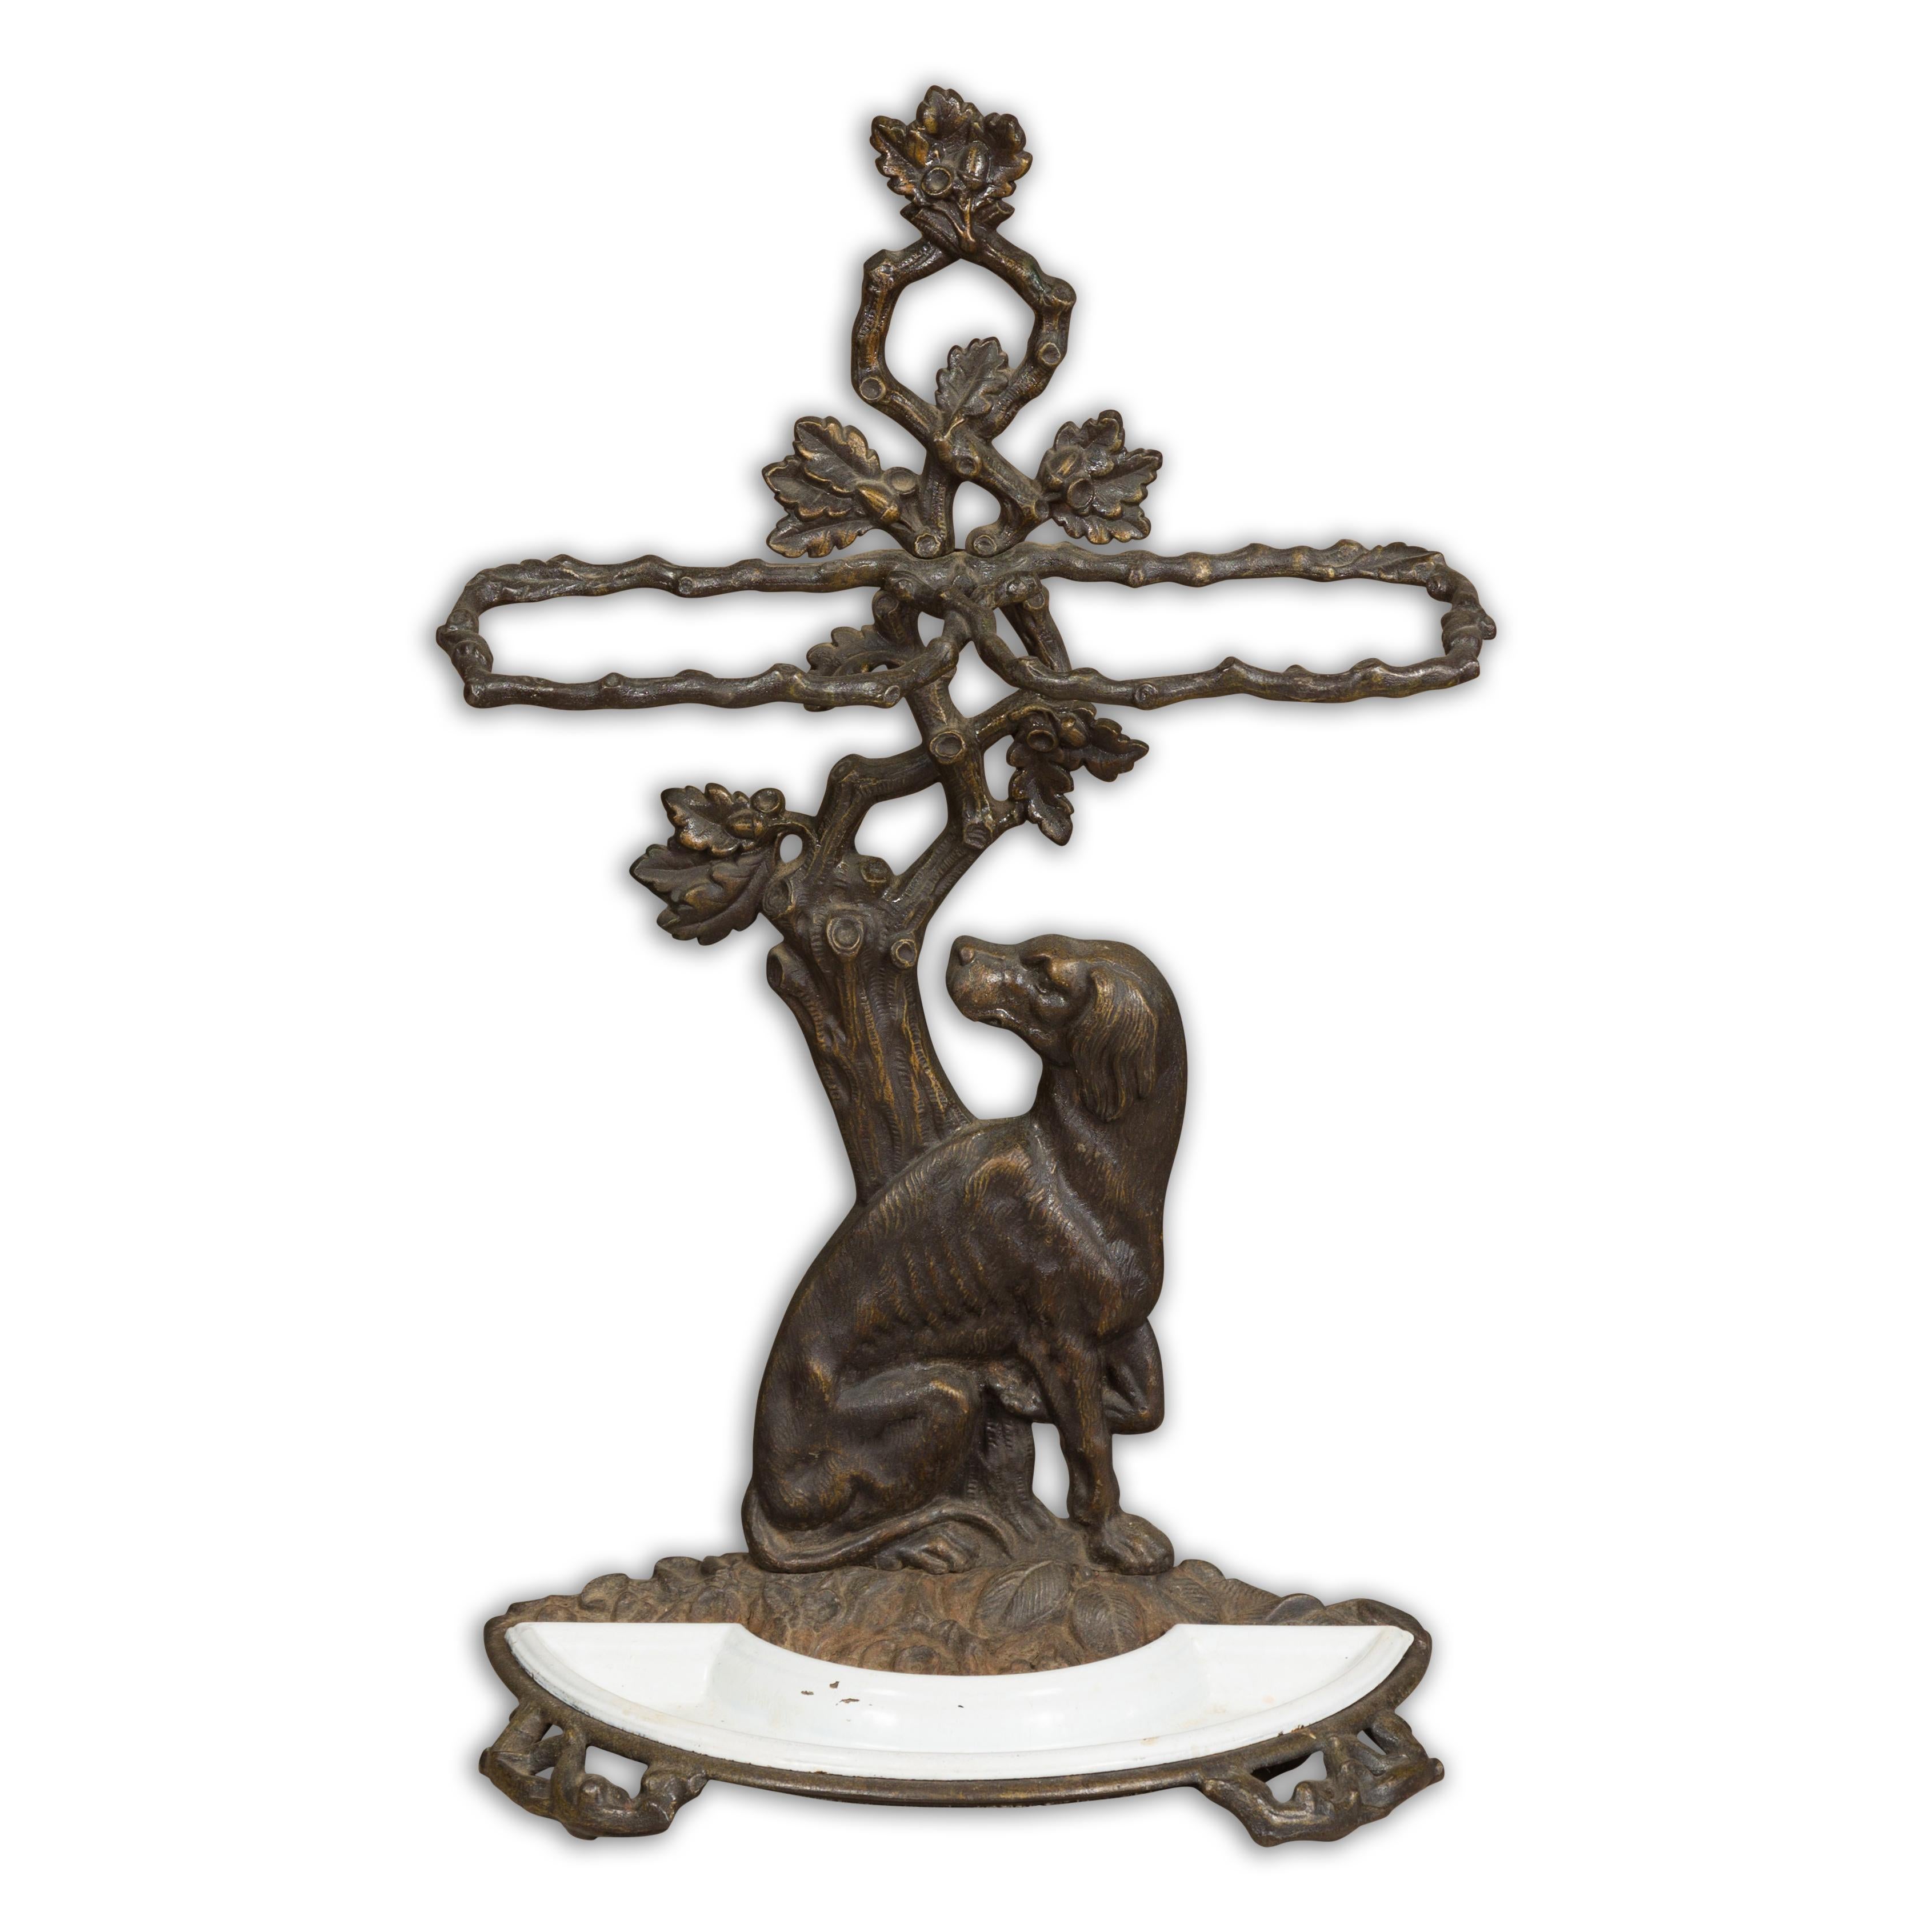 An English iron umbrella stand from the 20th century with dog sitting in front of a tree motif. Add a dash of whimsical elegance to your foyer or hallway with this handsome English iron umbrella stand from the 20th century. Brimming with character